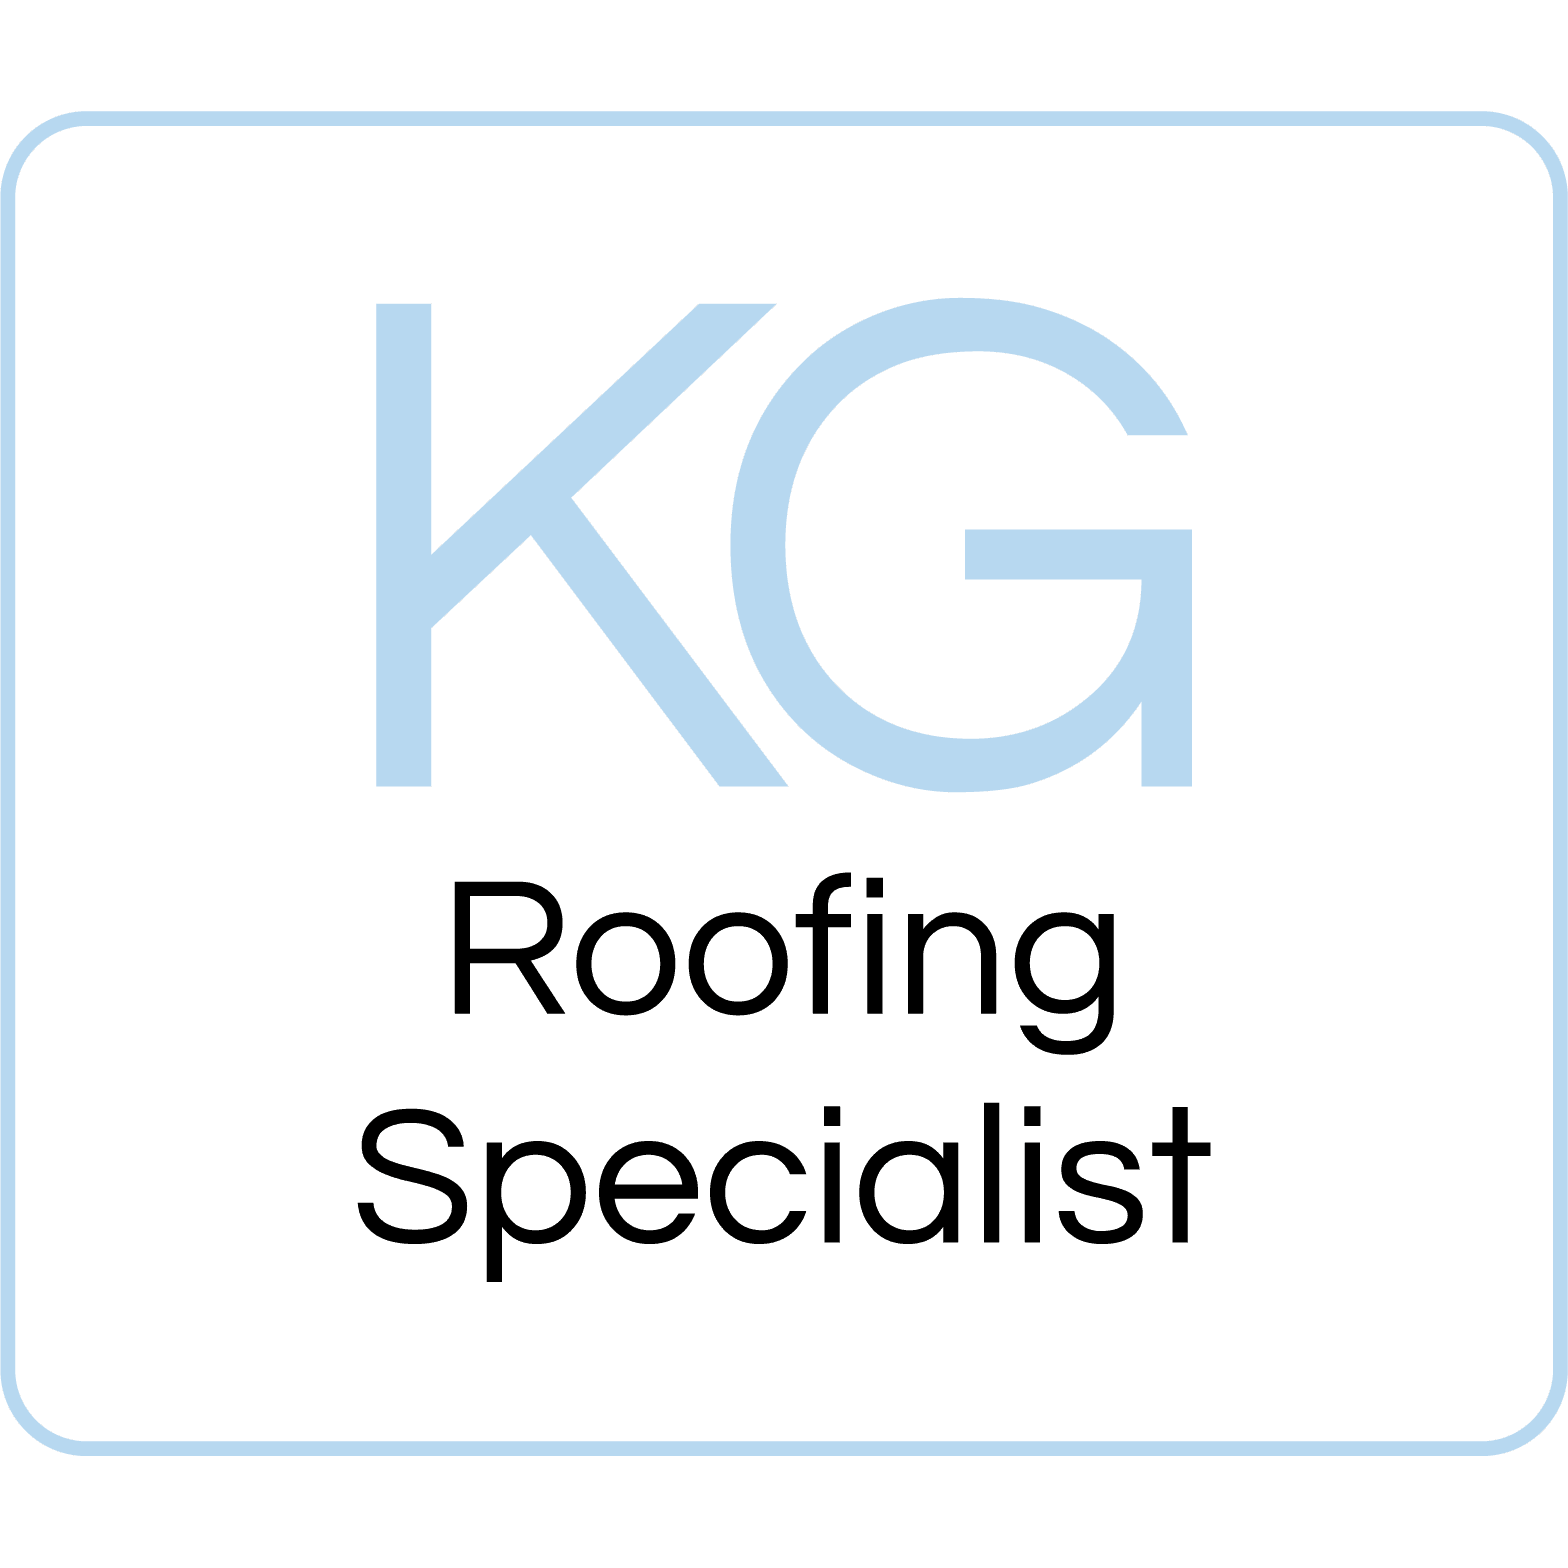 KG Roofing Specialist - Mansfield, Nottinghamshire NG19 6TY - 07543 566193 | ShowMeLocal.com